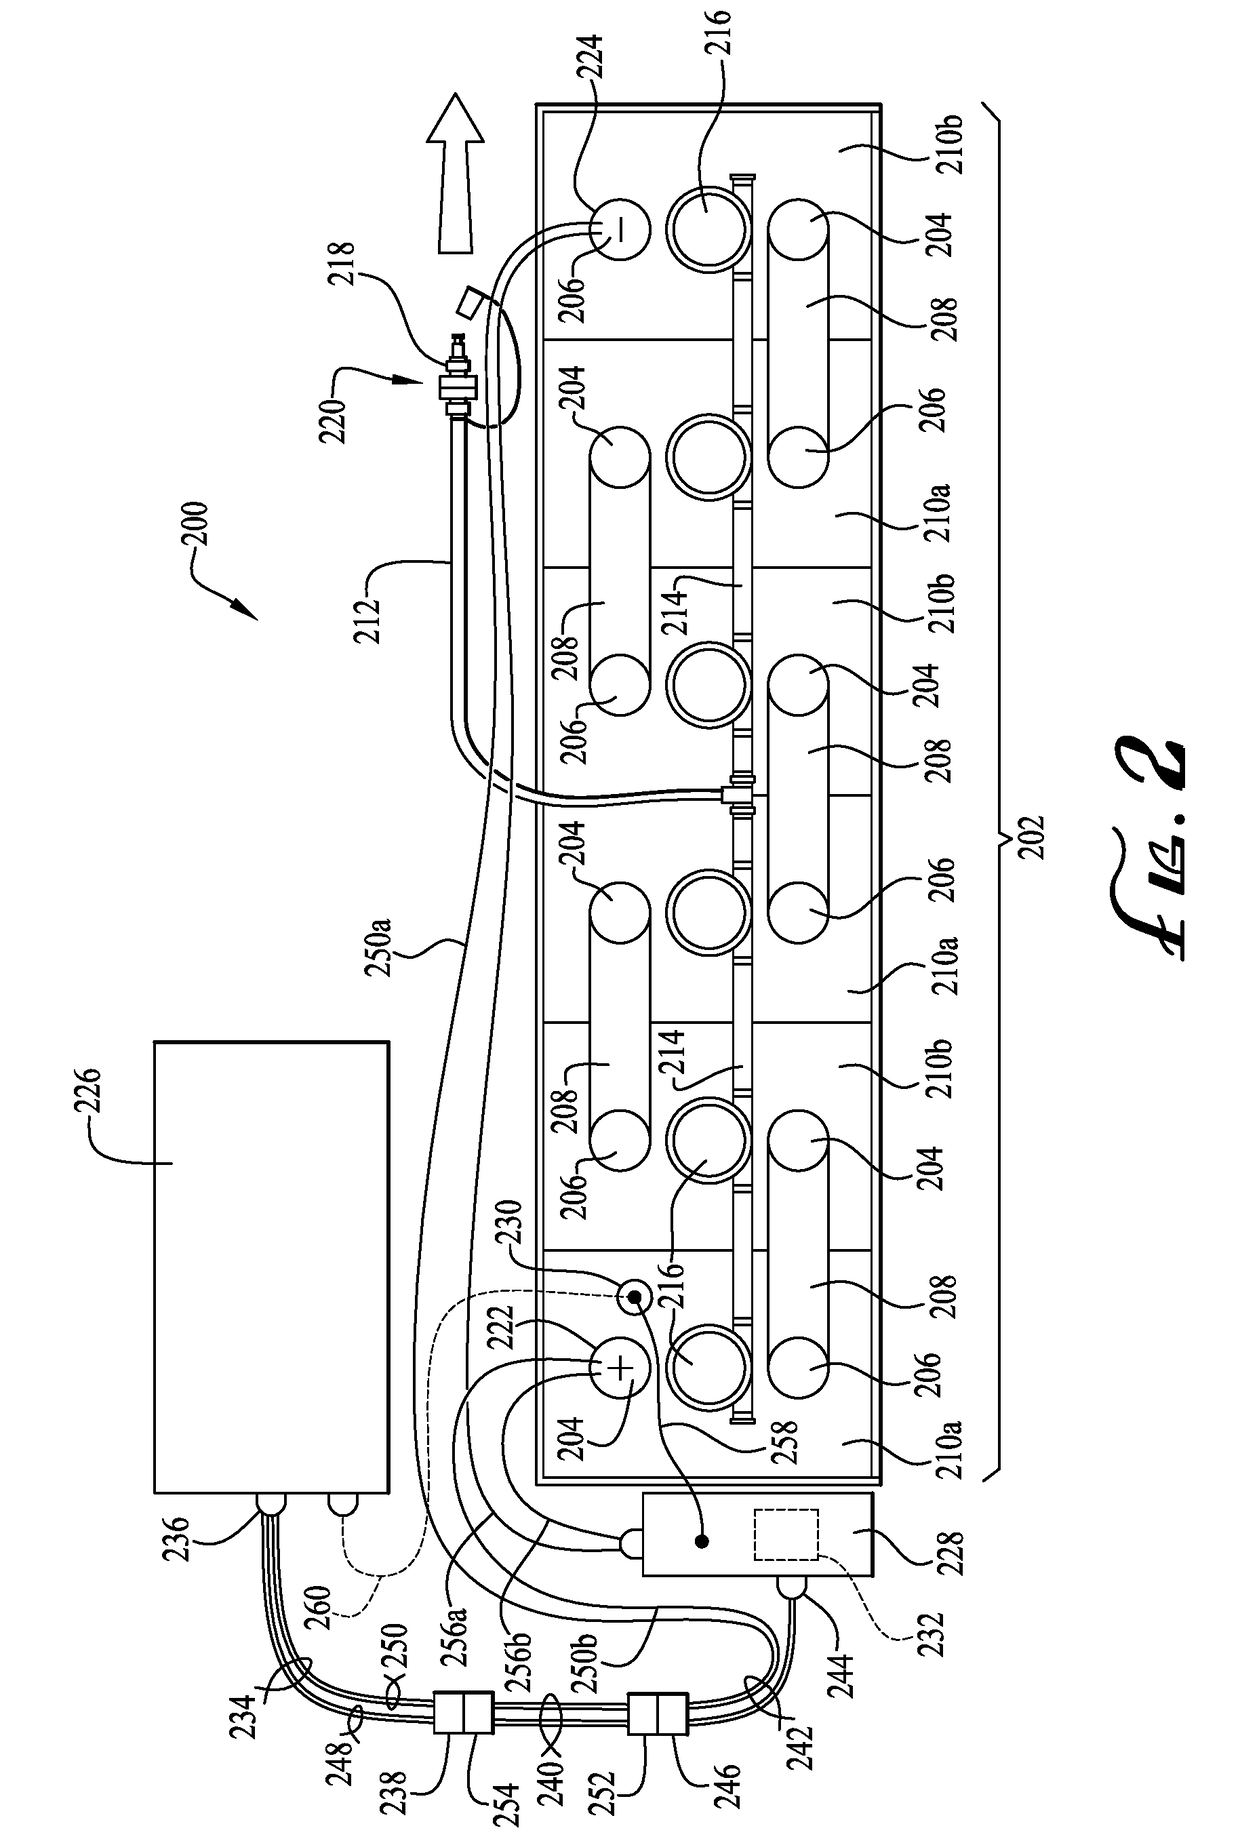 Battery watering event detection using a temperature sensor